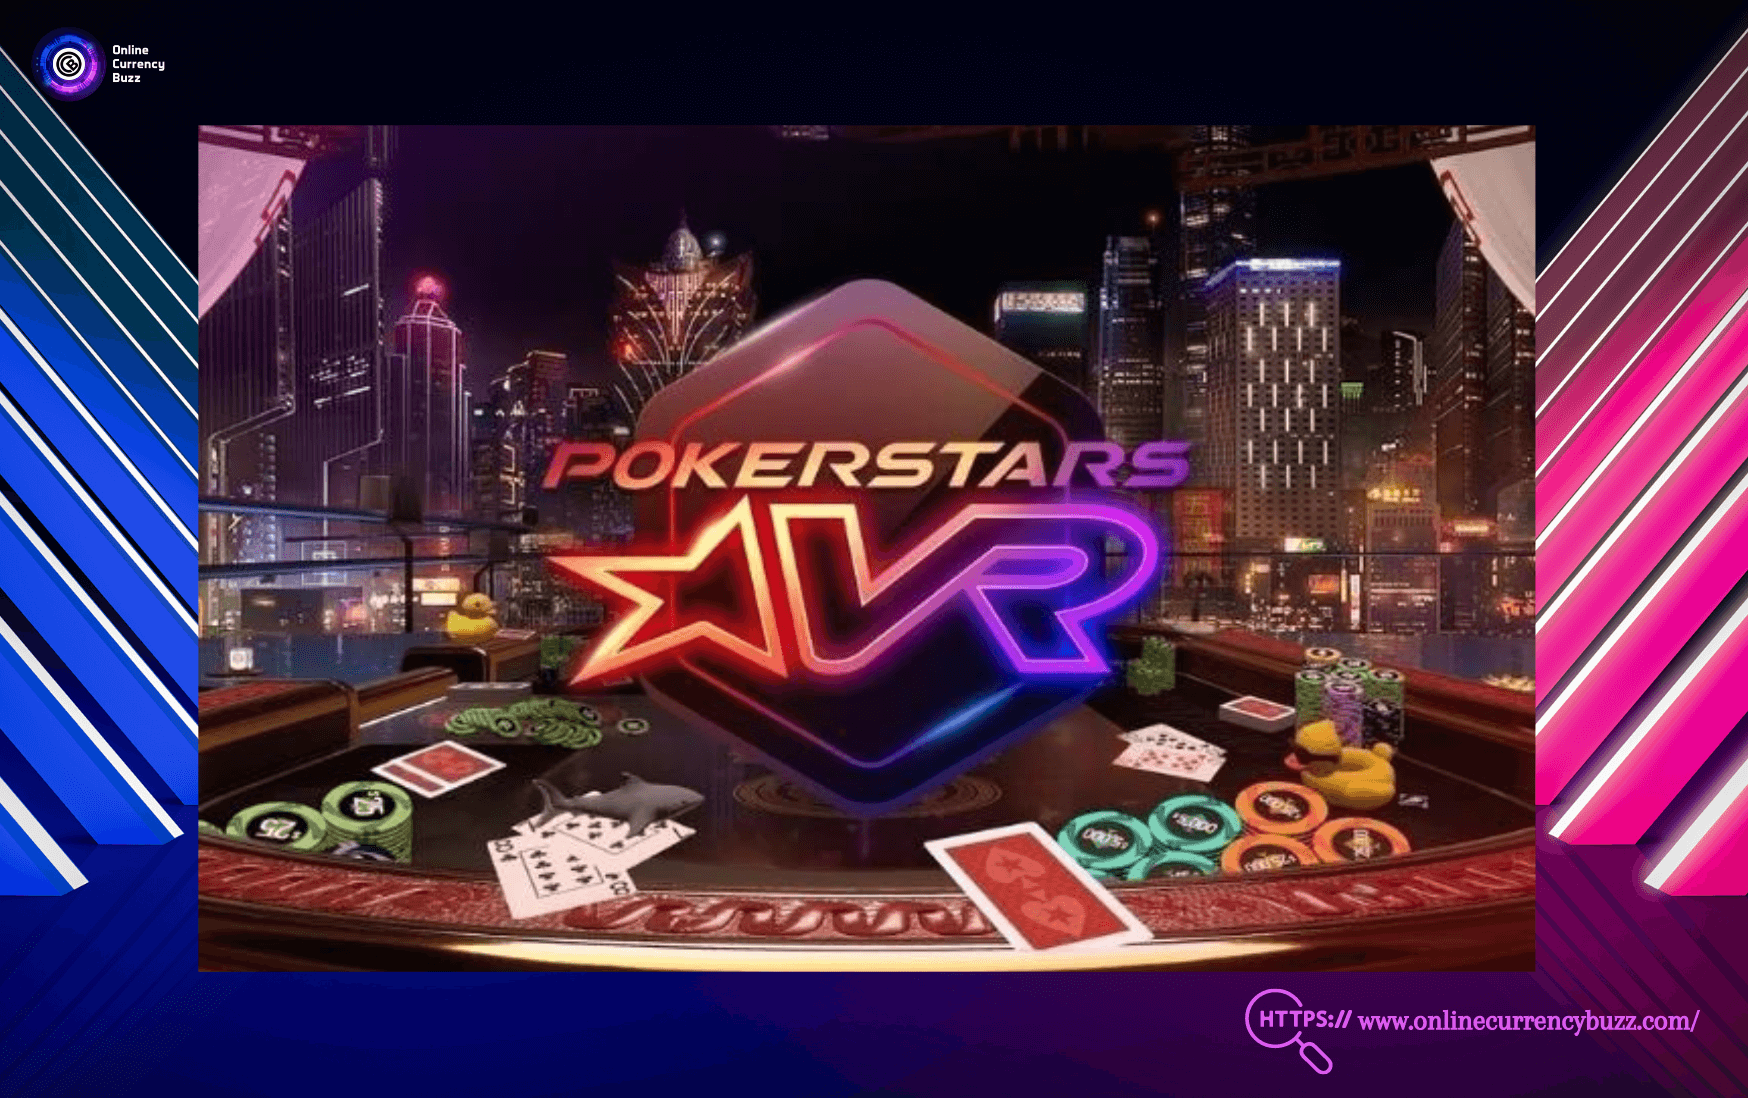 PokerStars VR: Test Your Poker Face in Virtual Reality